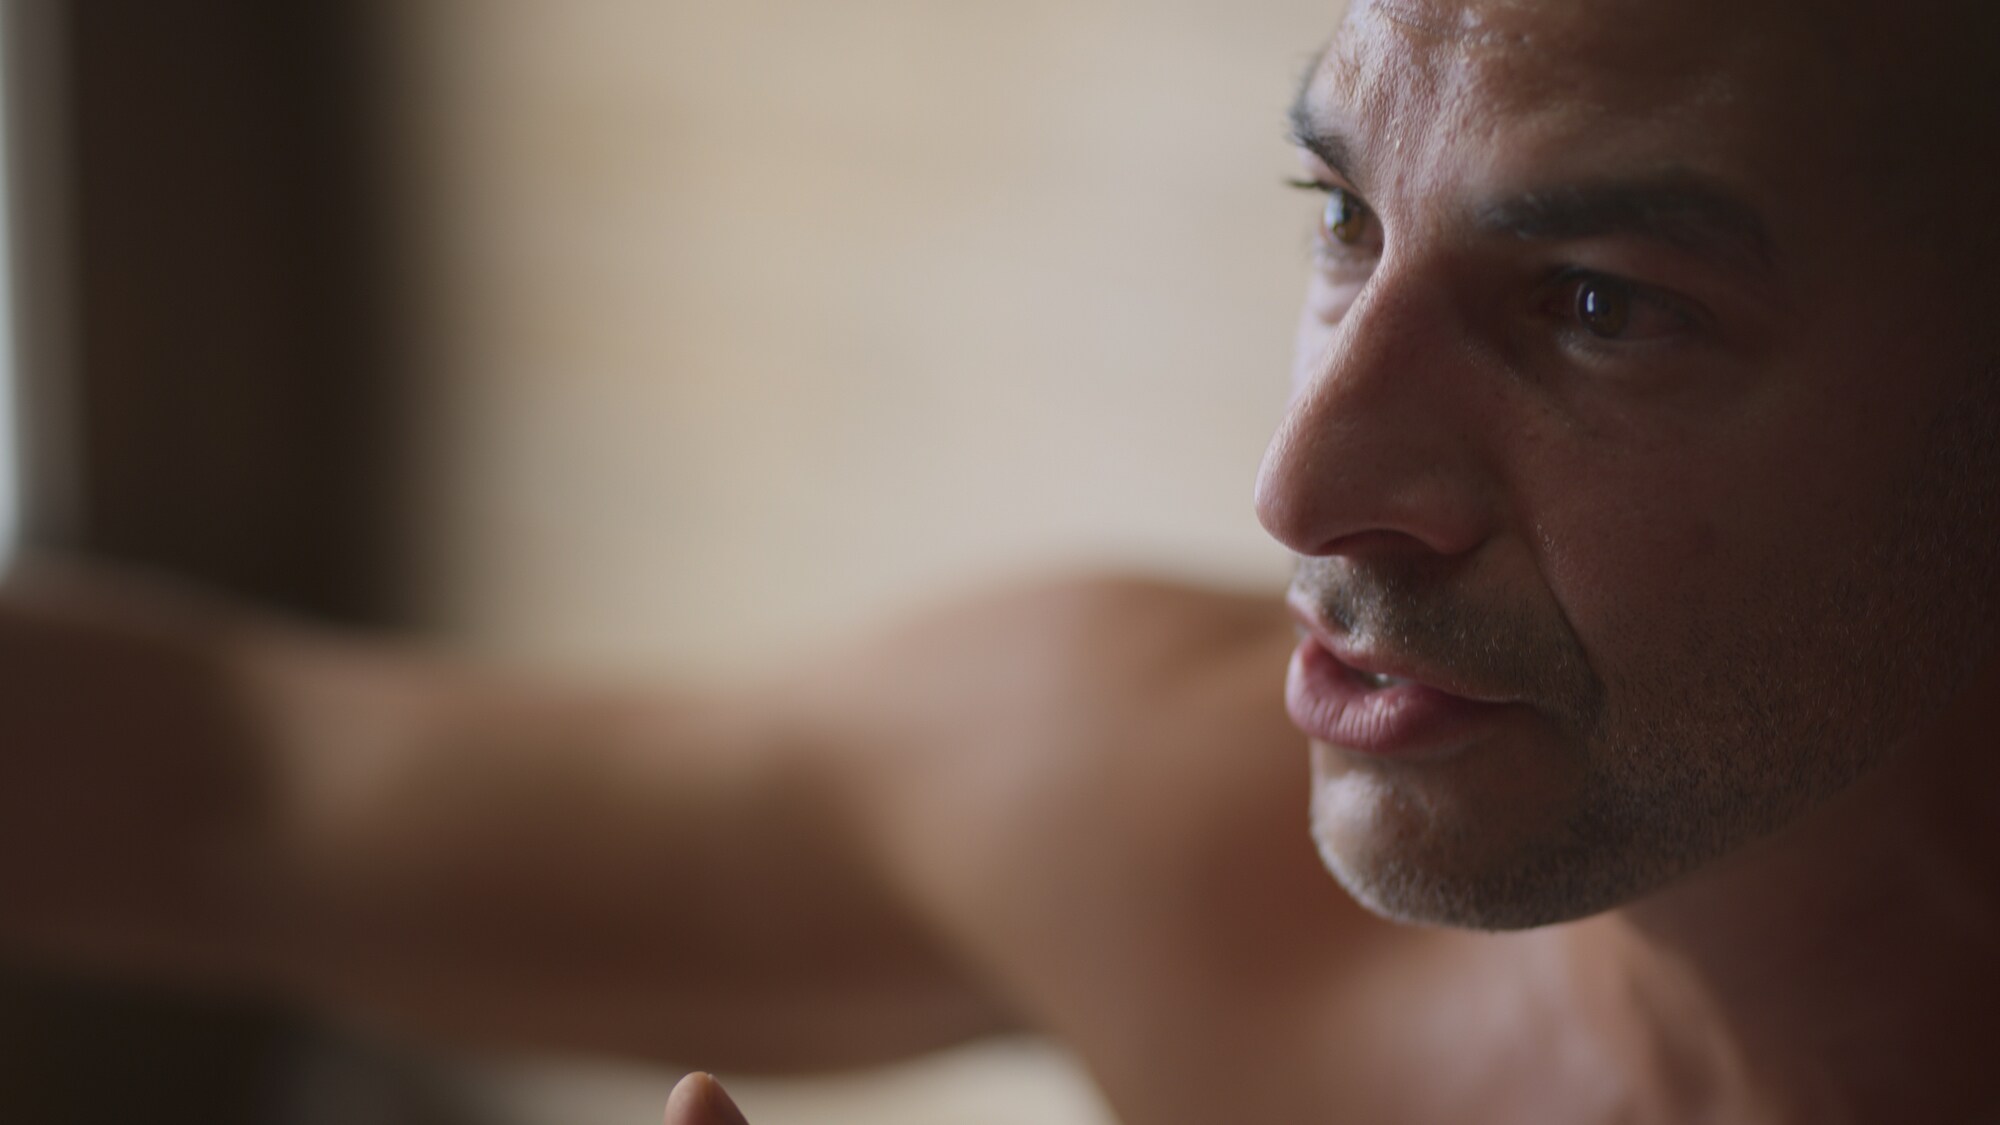 Dr. Peter Attia talks to Chris Hemsworth in the sauna. (National Geographic for Disney+)